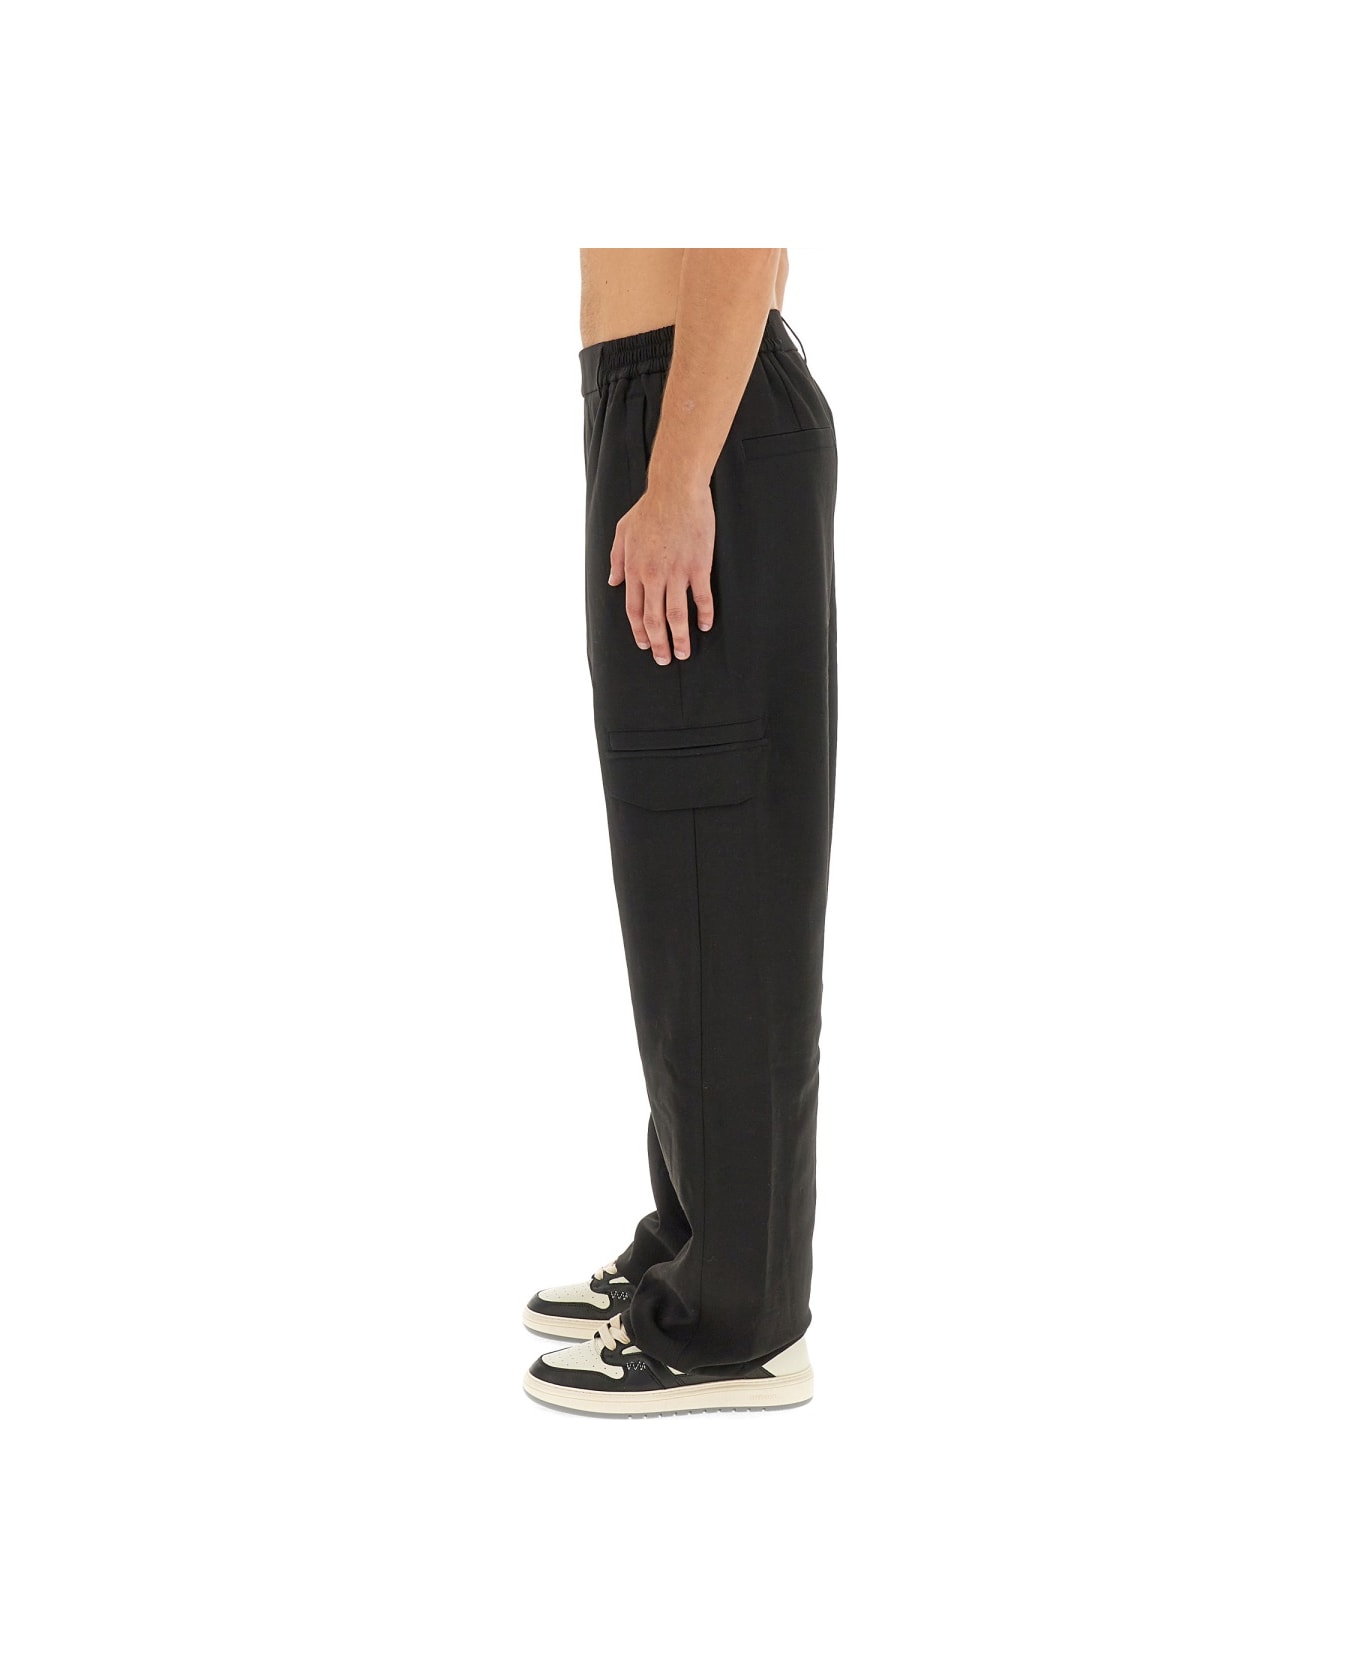 REPRESENT Relaxed Fit Pants - BLACK